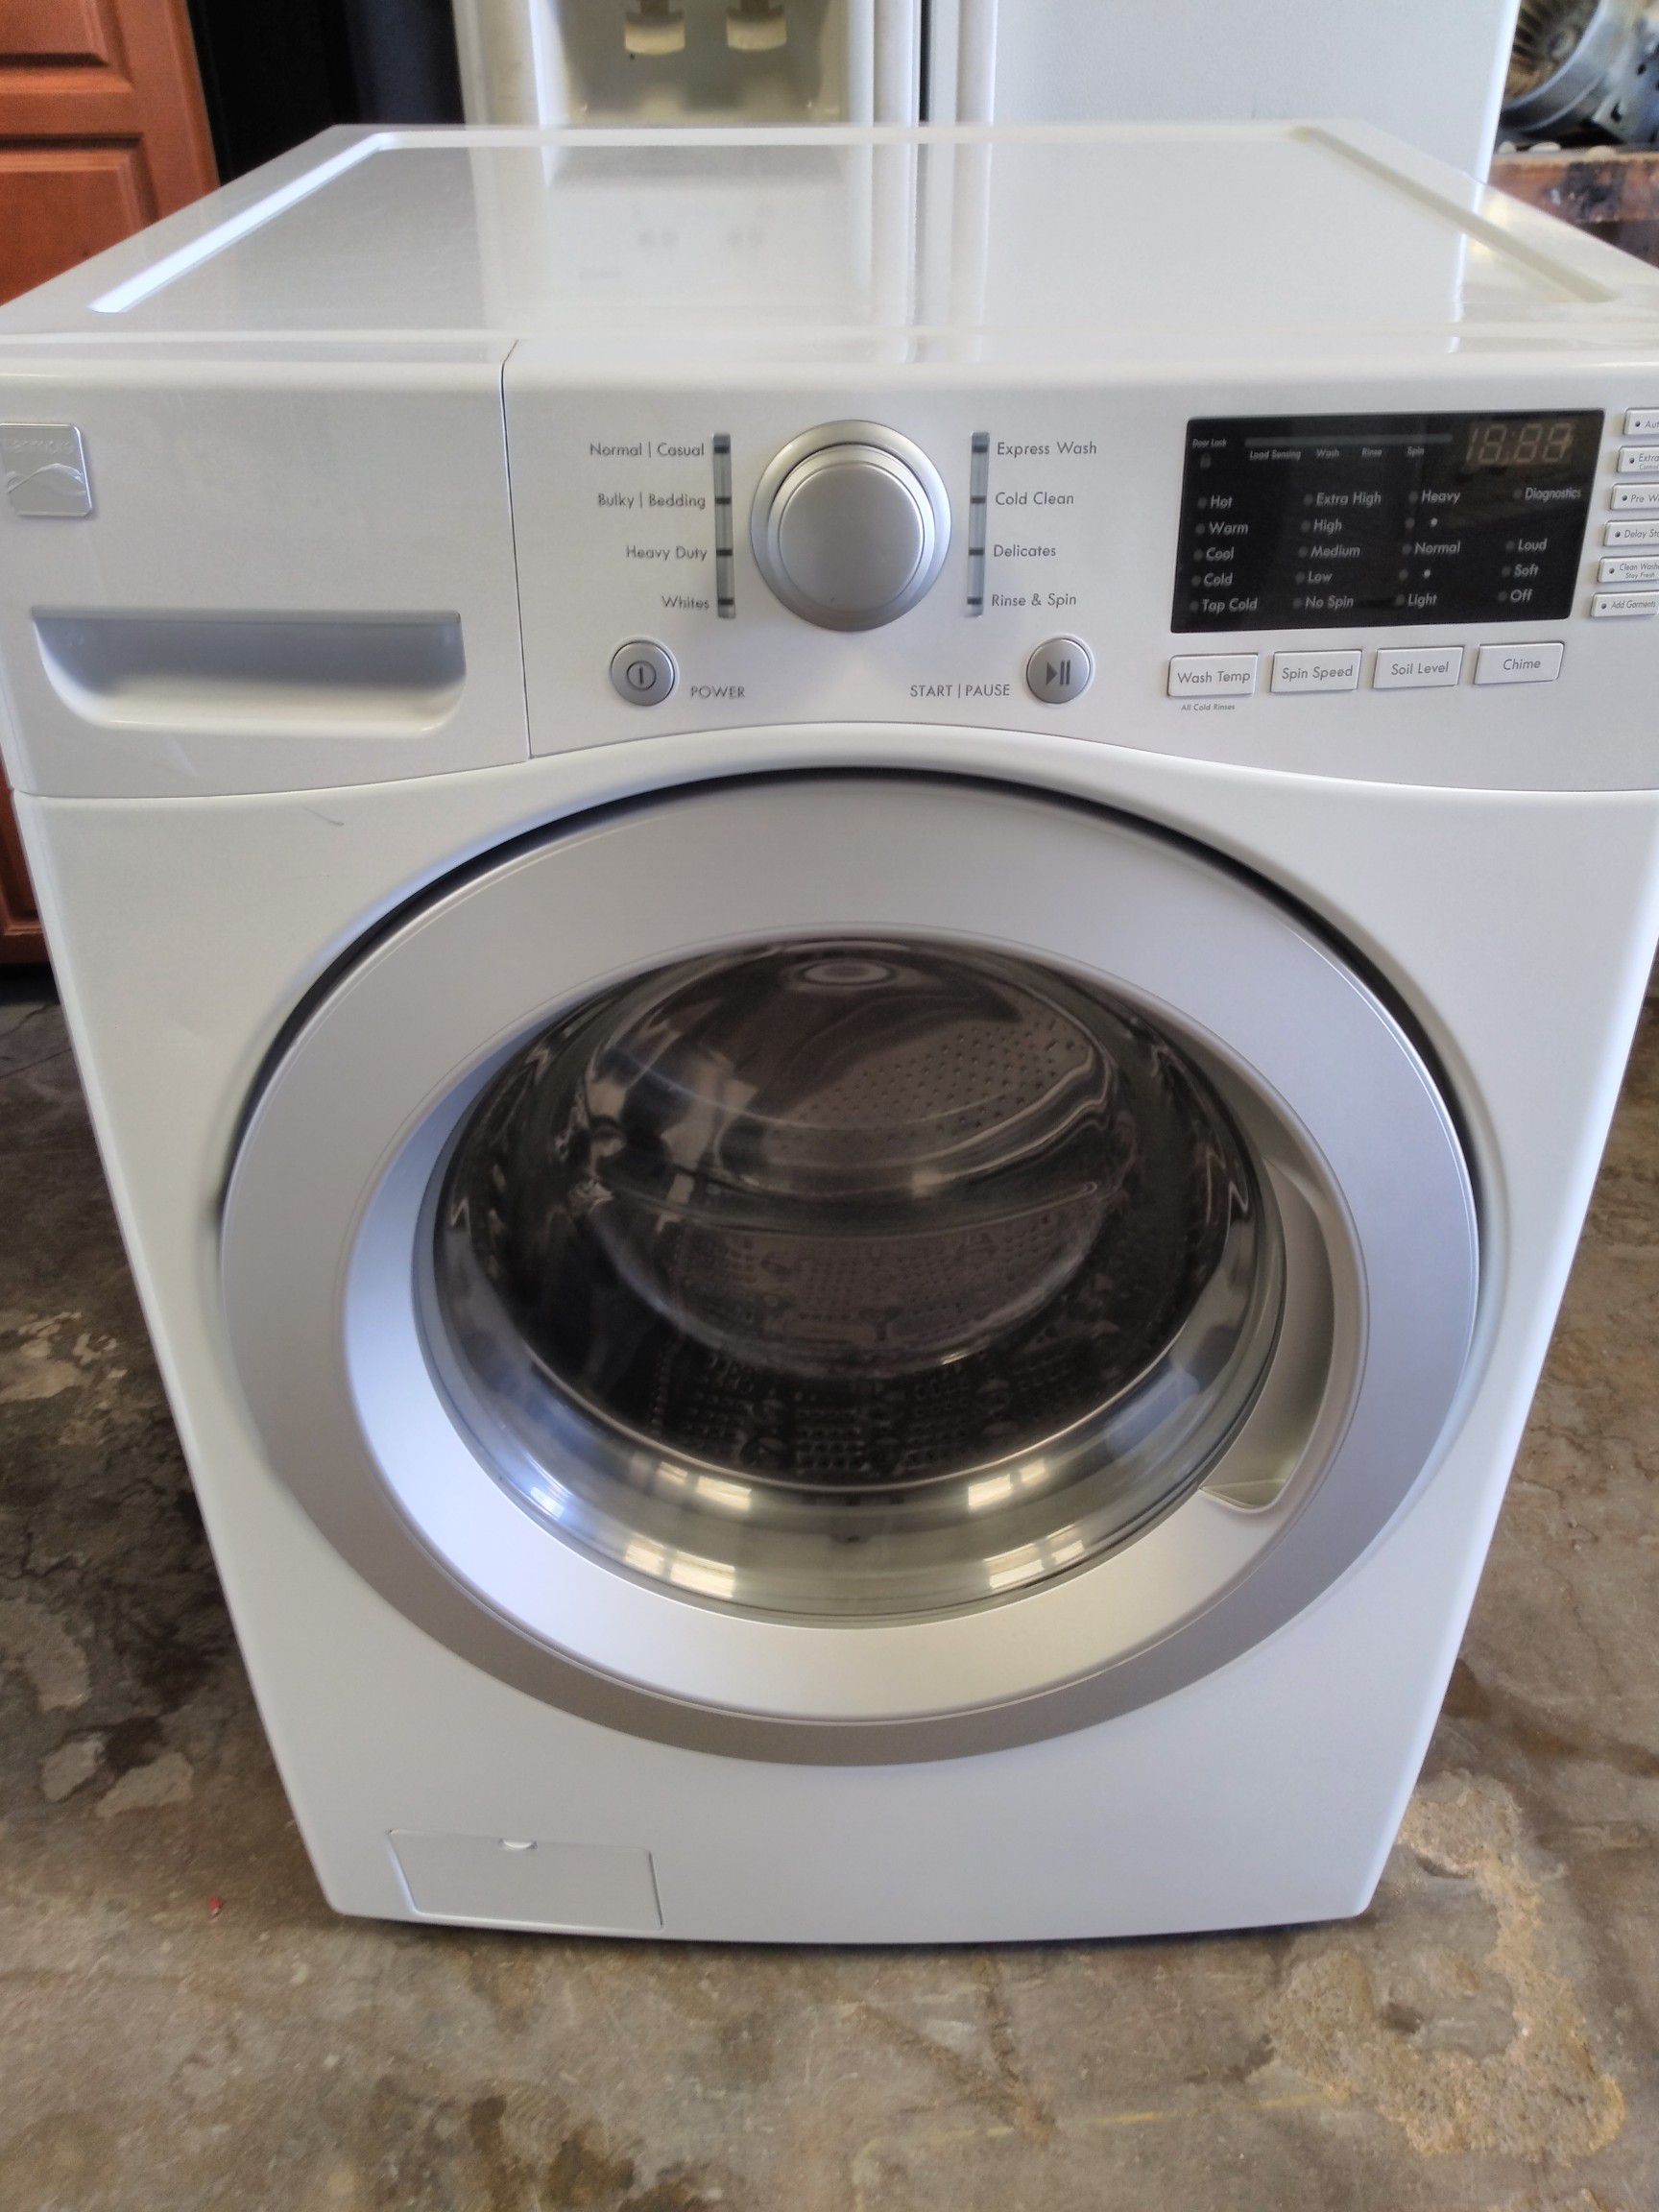 Kenmore Washer $240 With Warranty